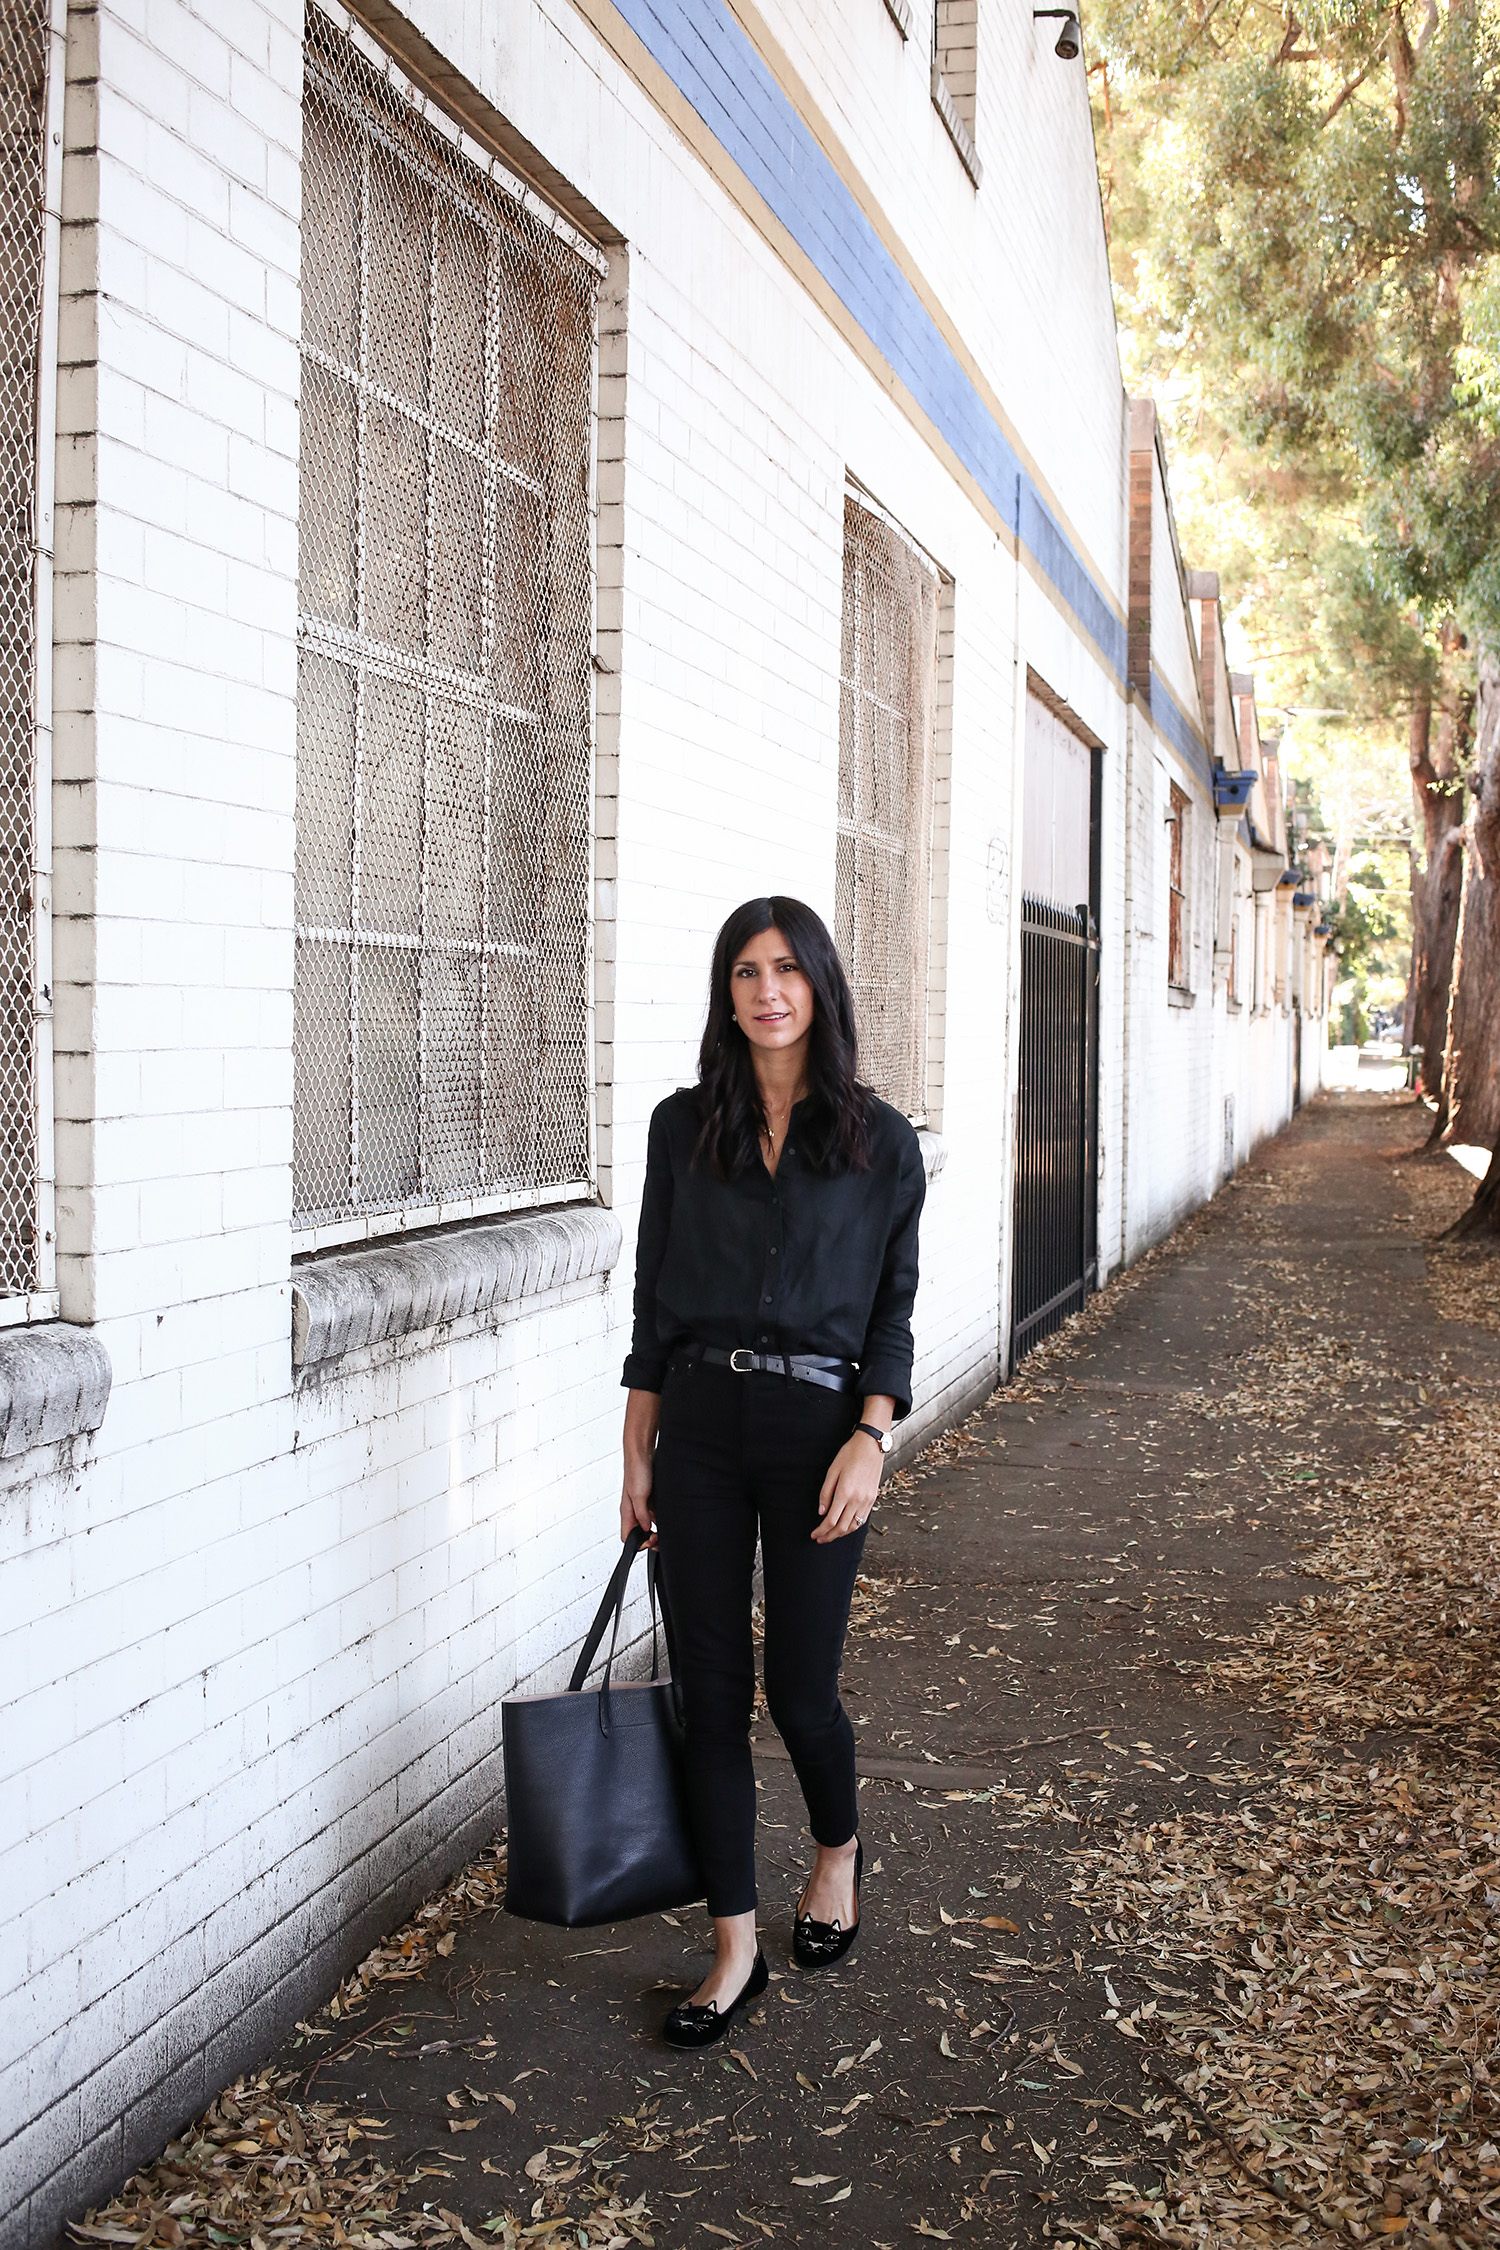 Jamie Lee of Mademoiselle wearing an all black minimal style outfit